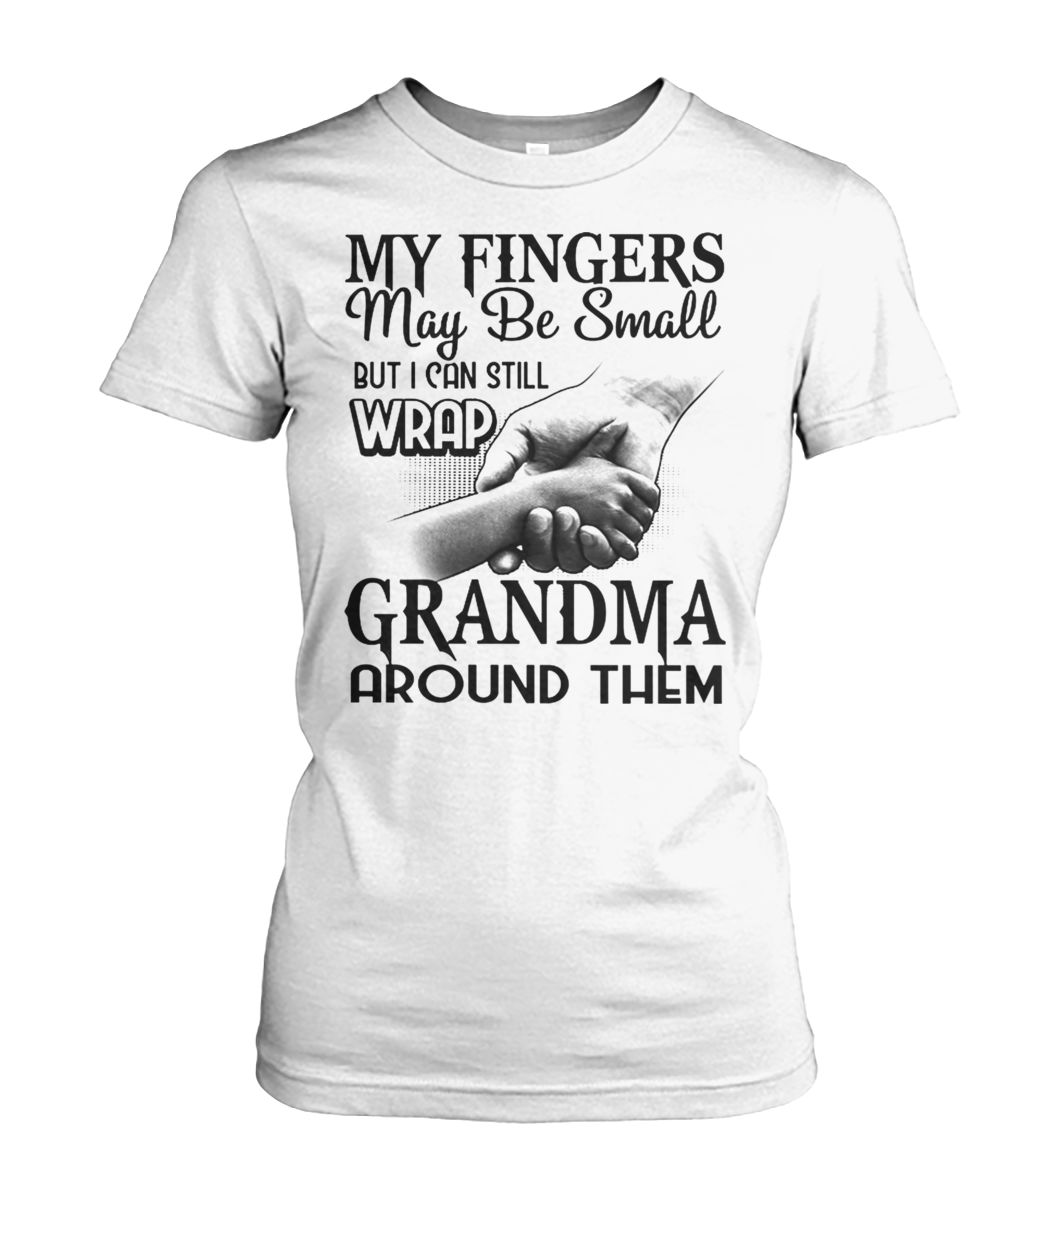 My fingers may be small but I can still wrap grandma around them women's crew tee